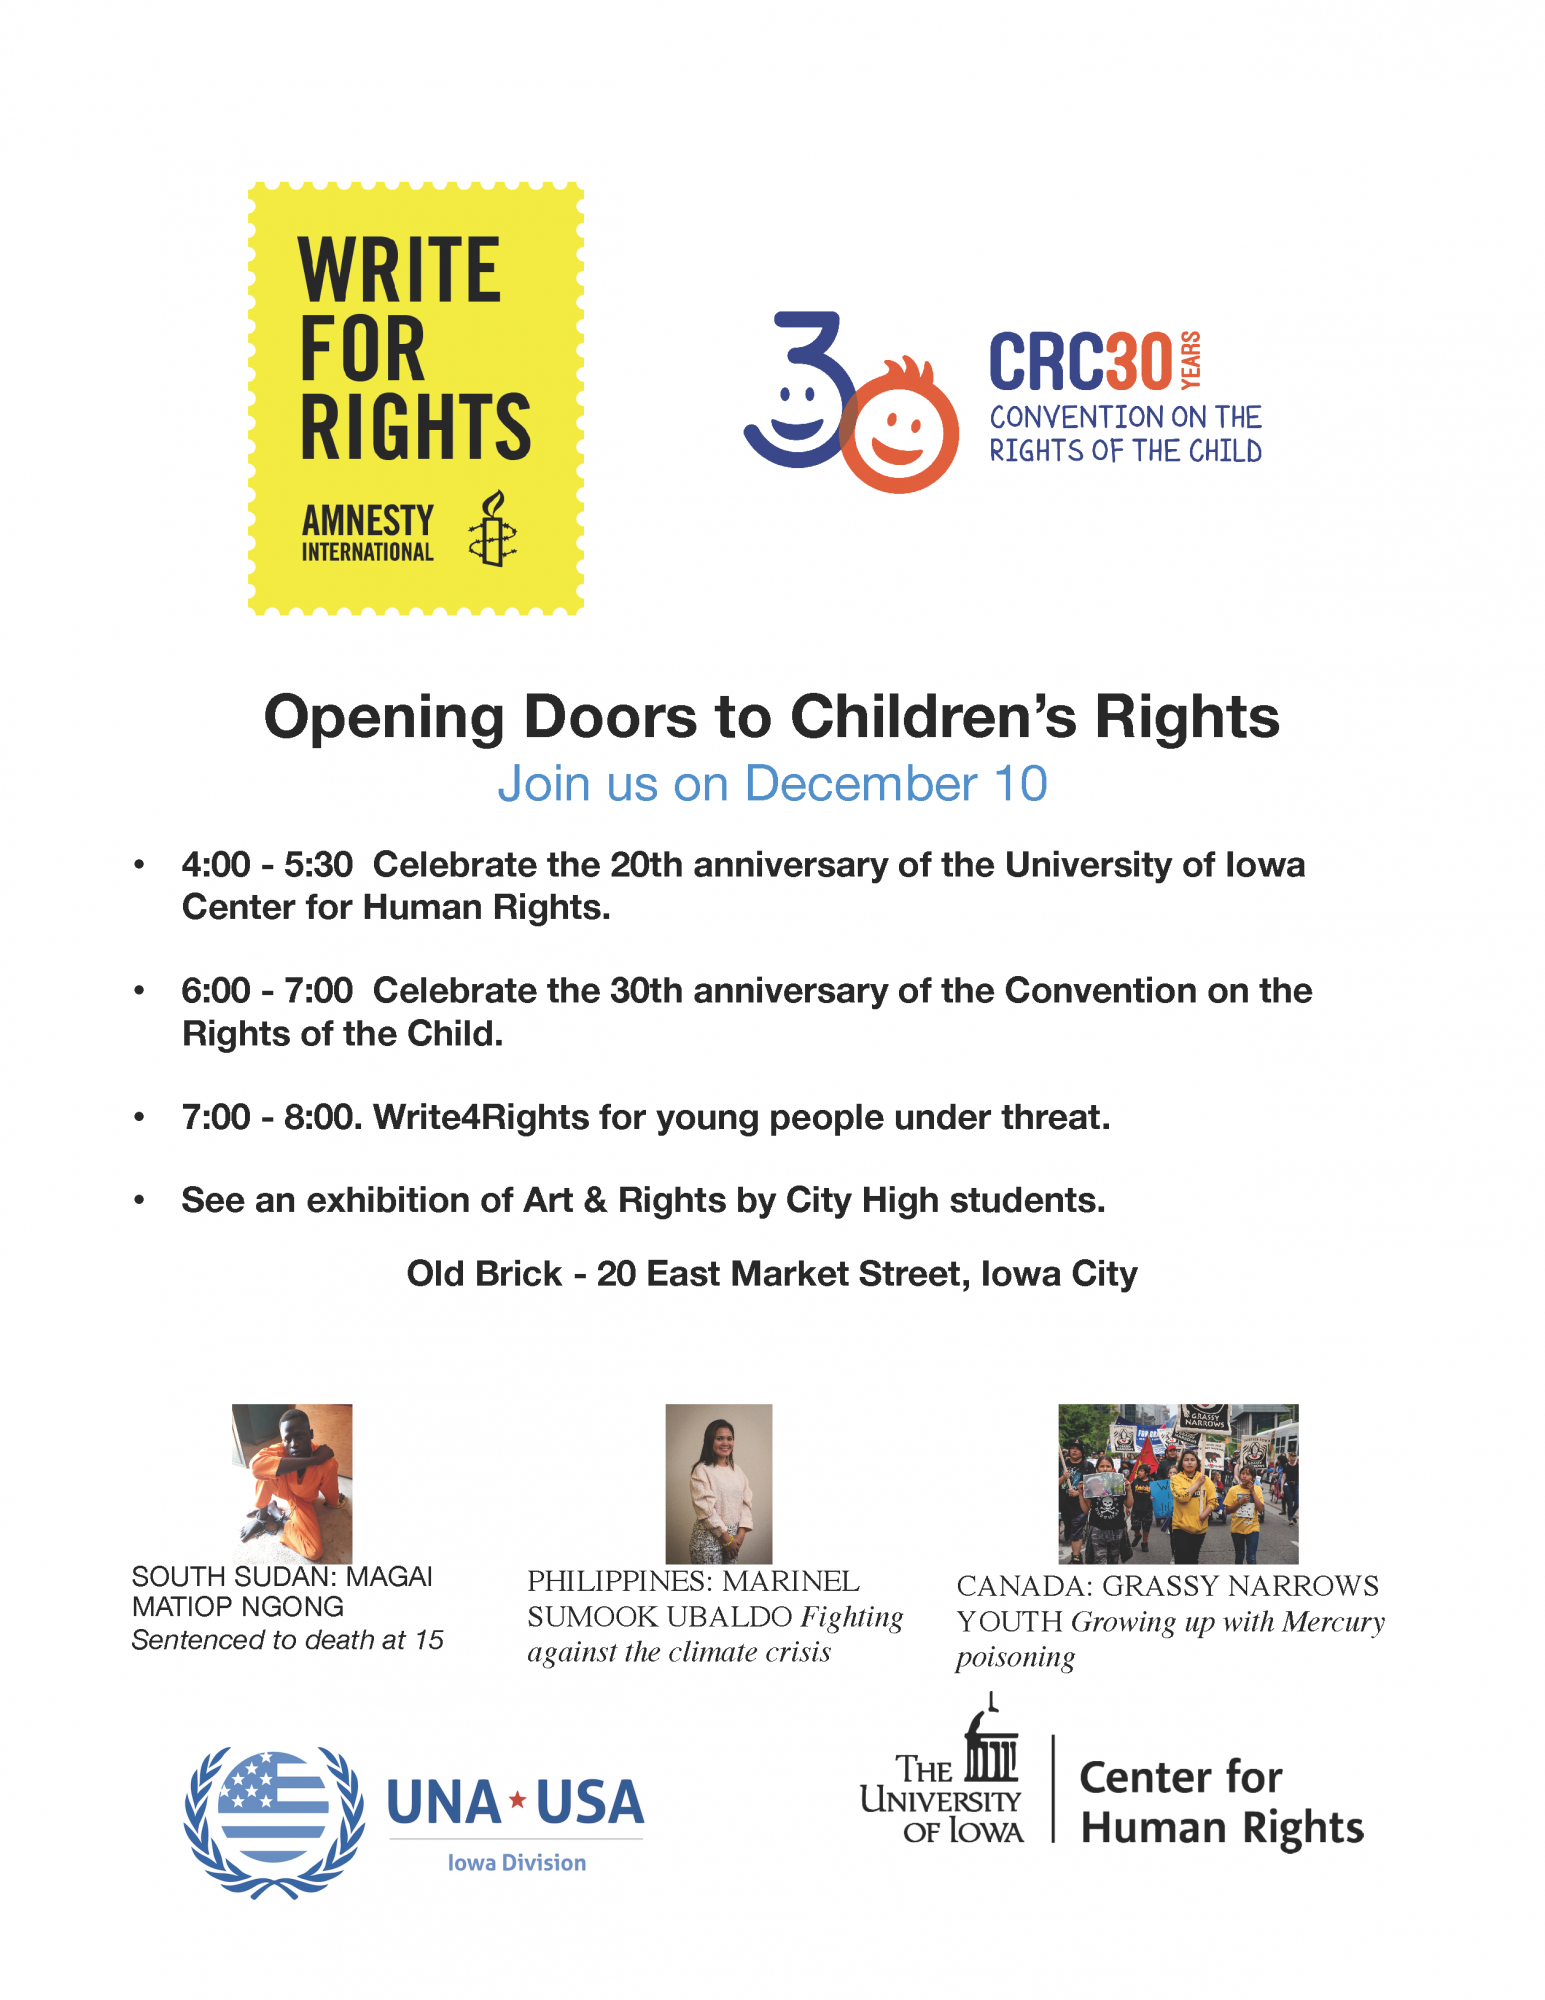  Opening Doors to Children's Rights    Join us on December 10    • 4:00 - 5:30 Celebrate the 20th anniversary of the University of Iowa Center for Human Rights.    • 6:00 - 7:00 Celebrate the 30th anniversary of the Convention on the Rights of the Child.    • 7:00 - 8:00. Write4Rights for young people under threat.    • See an exhibition of Art & Rights by City High students.    Old Brick - 20 East Market Street, Iowa City    Sponsors: Write for Rights, Amnesty International; CRC30, Convention on the Rights of the Child; UNA-USA, Iowa Division; UI Center for Human Rights